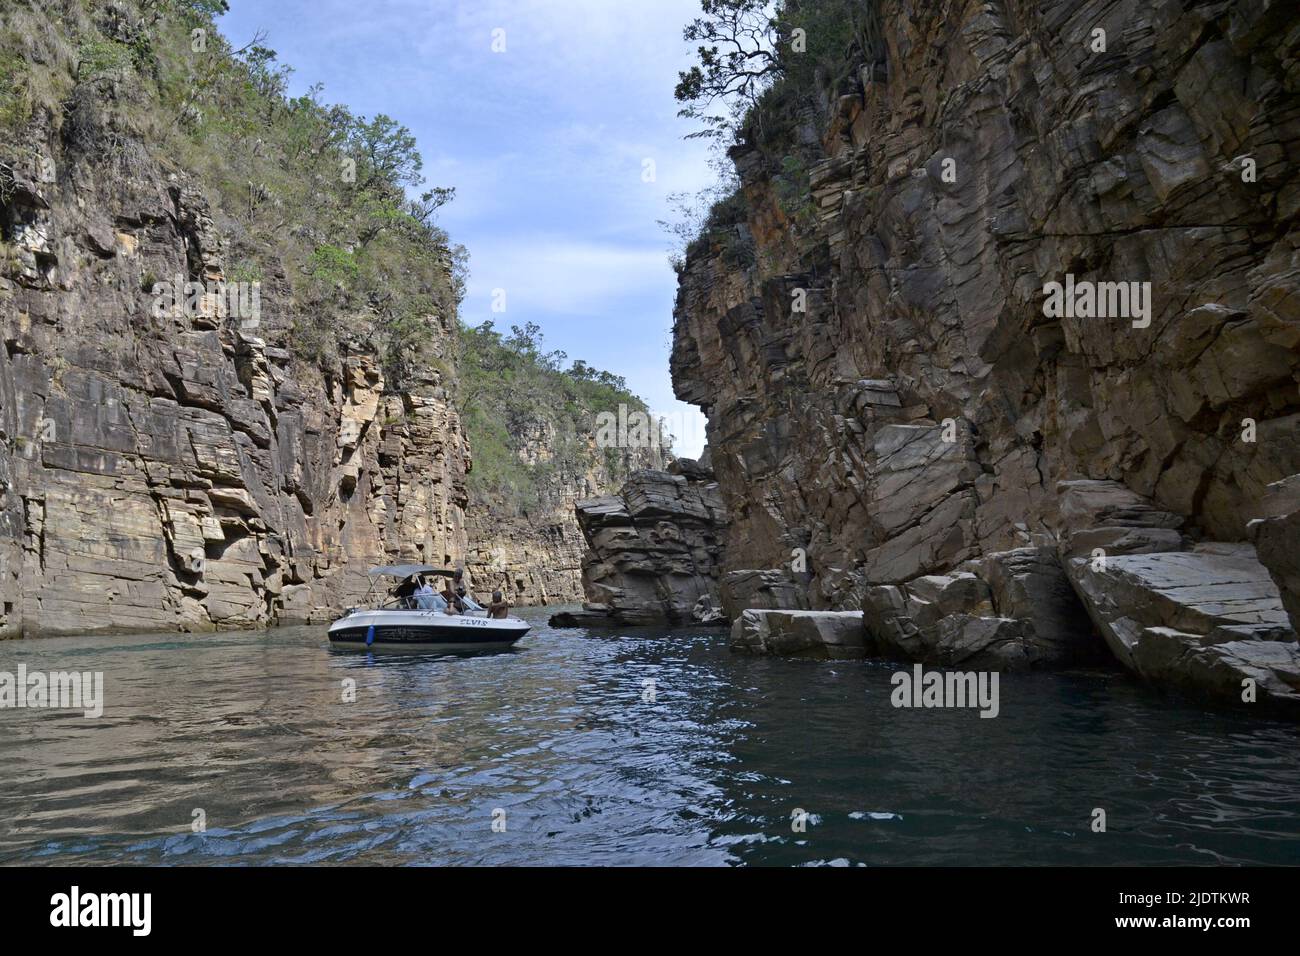 Tourists having fun on a speedboat ride inside the canyons, with several boats anchored, Brazil, South America, panoramic photo, between canyons Stock Photo